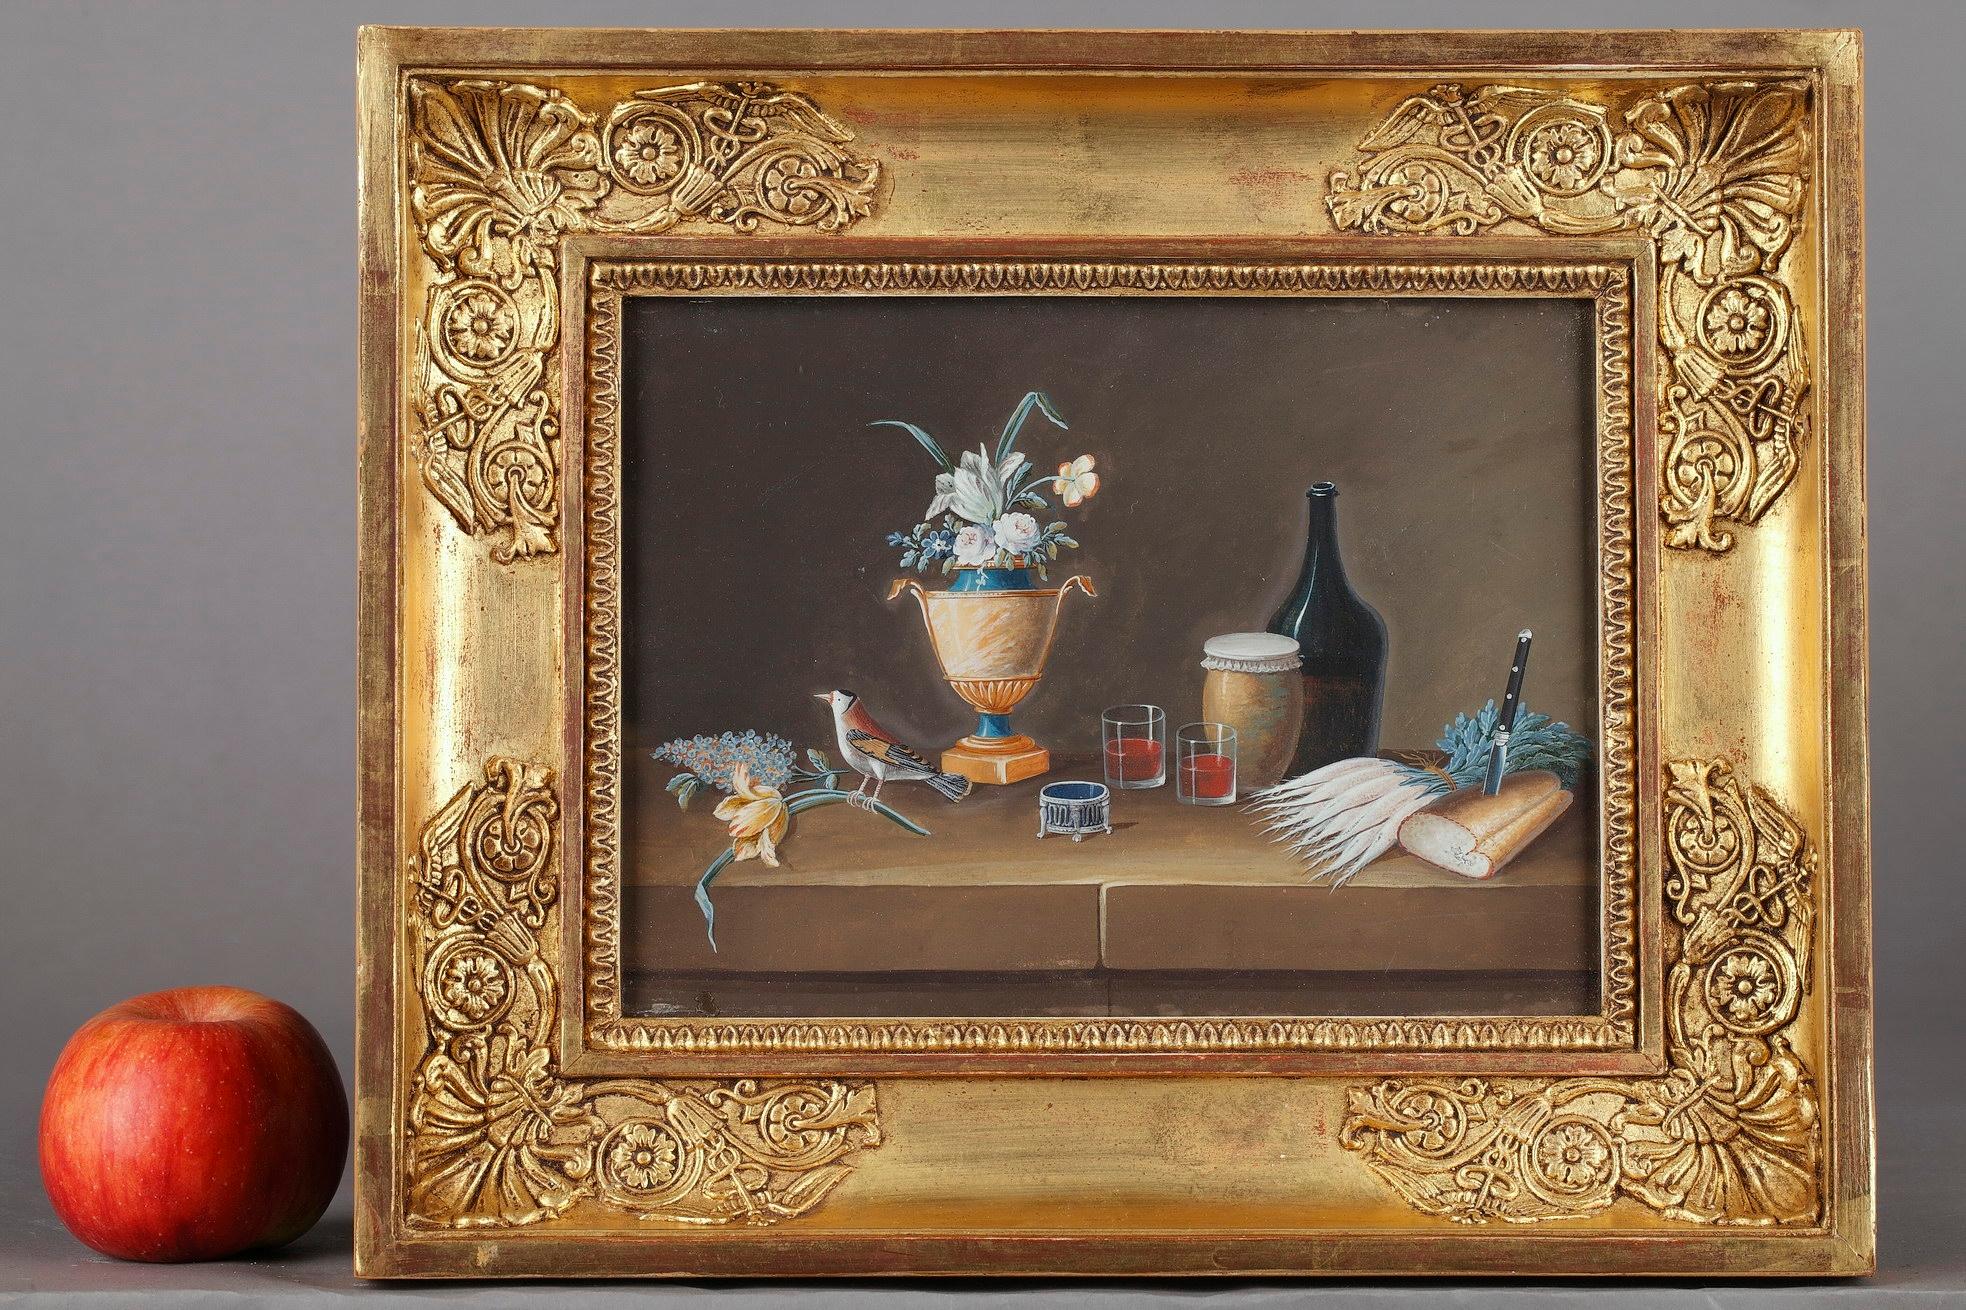 Five still lifes depicting various kitchenware and decorative objects on a stone entablature in Dutch masters style. They are composed of flowery vases, bottles, glasses, vegetables, coffee service, birdcage, book, jug... A still life features a